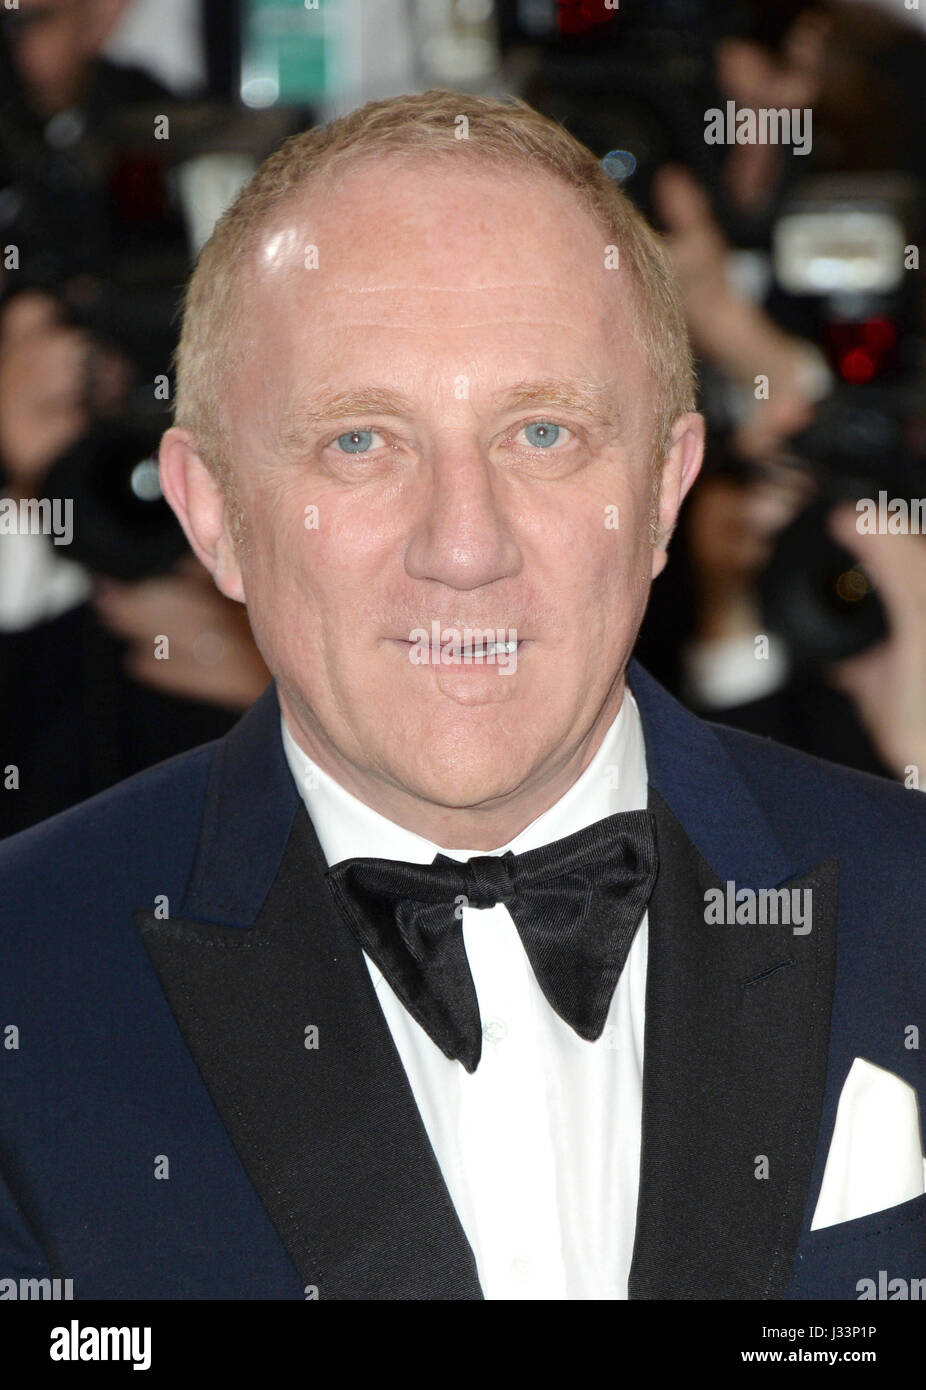 Francois-Henri Pinault attending The Metropolitan Museum of Art Costume Institute Benefit Gala 2017, in New York, USA. PRESS ASSOCIATION Photo. Picture date: Monday 1st May, 2017. See PA Story SHOWBIZ Gala. Photo credit should read: Aurore Marechal/PA Wire Stock Photo